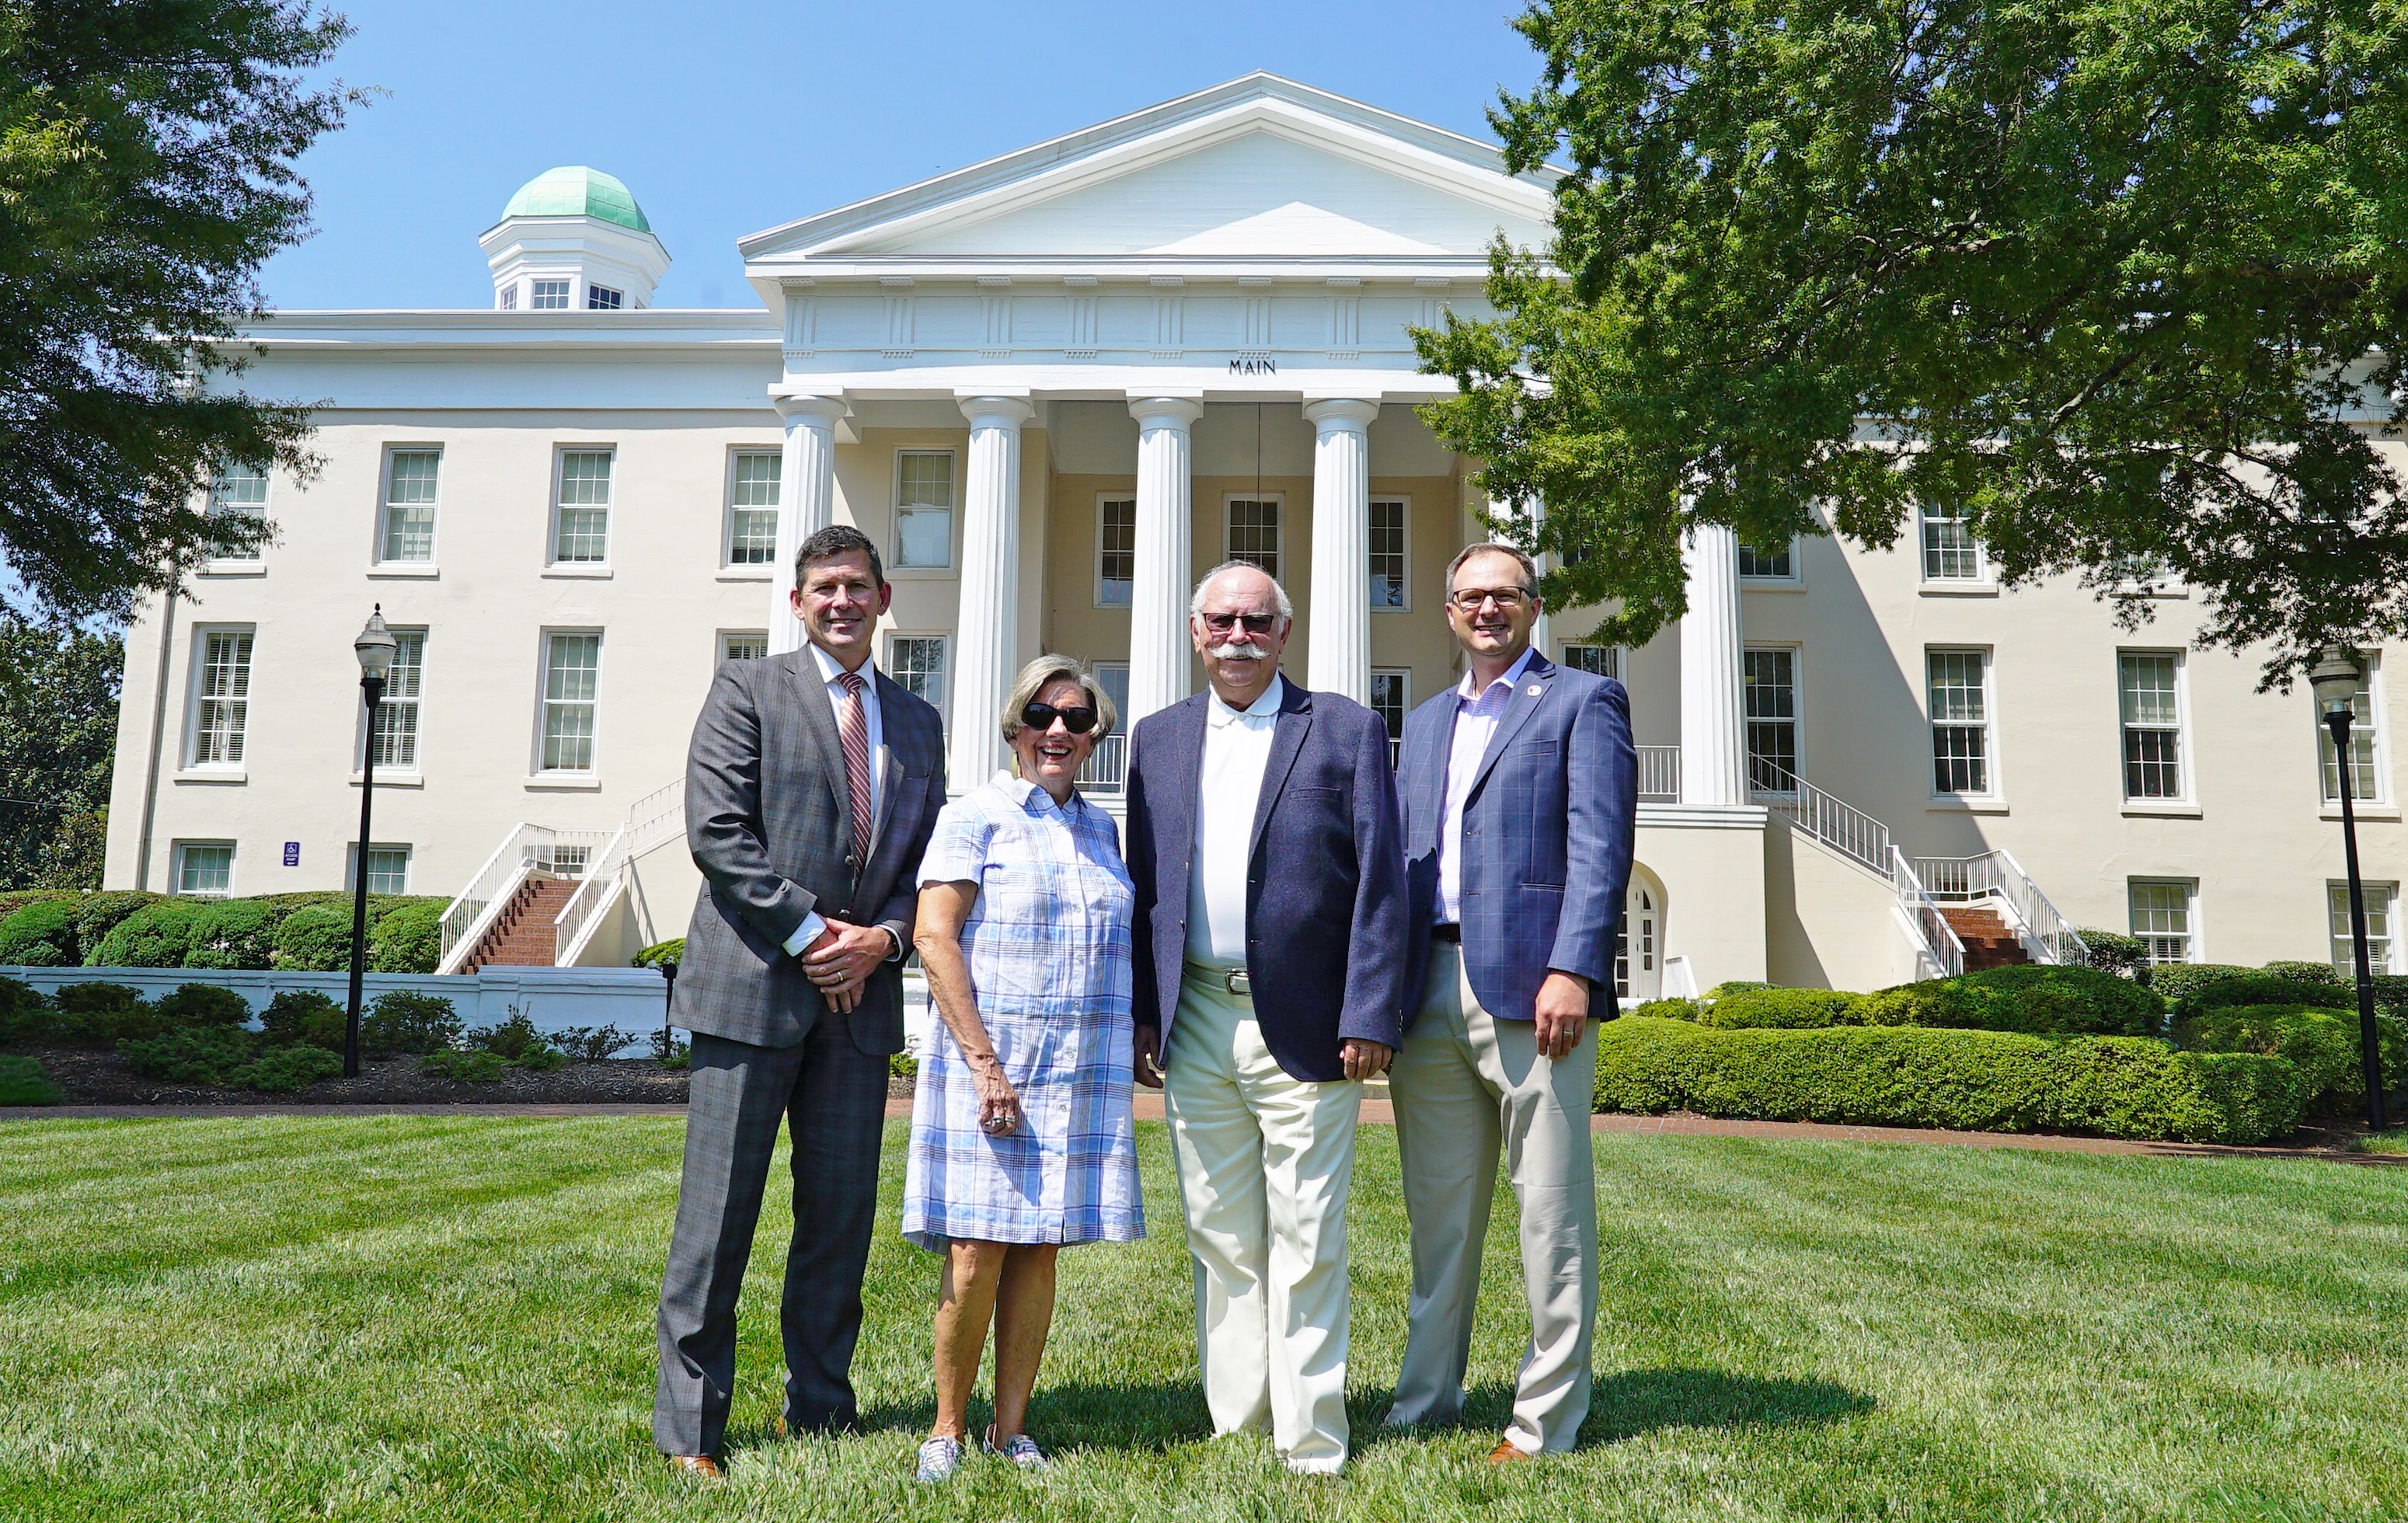  (L-R) Dr. Tim Brewer, Carol Childress, Frank Childress, and James Hogan stand in front of Mitchell's historic Main Building on the Statesville Campus.